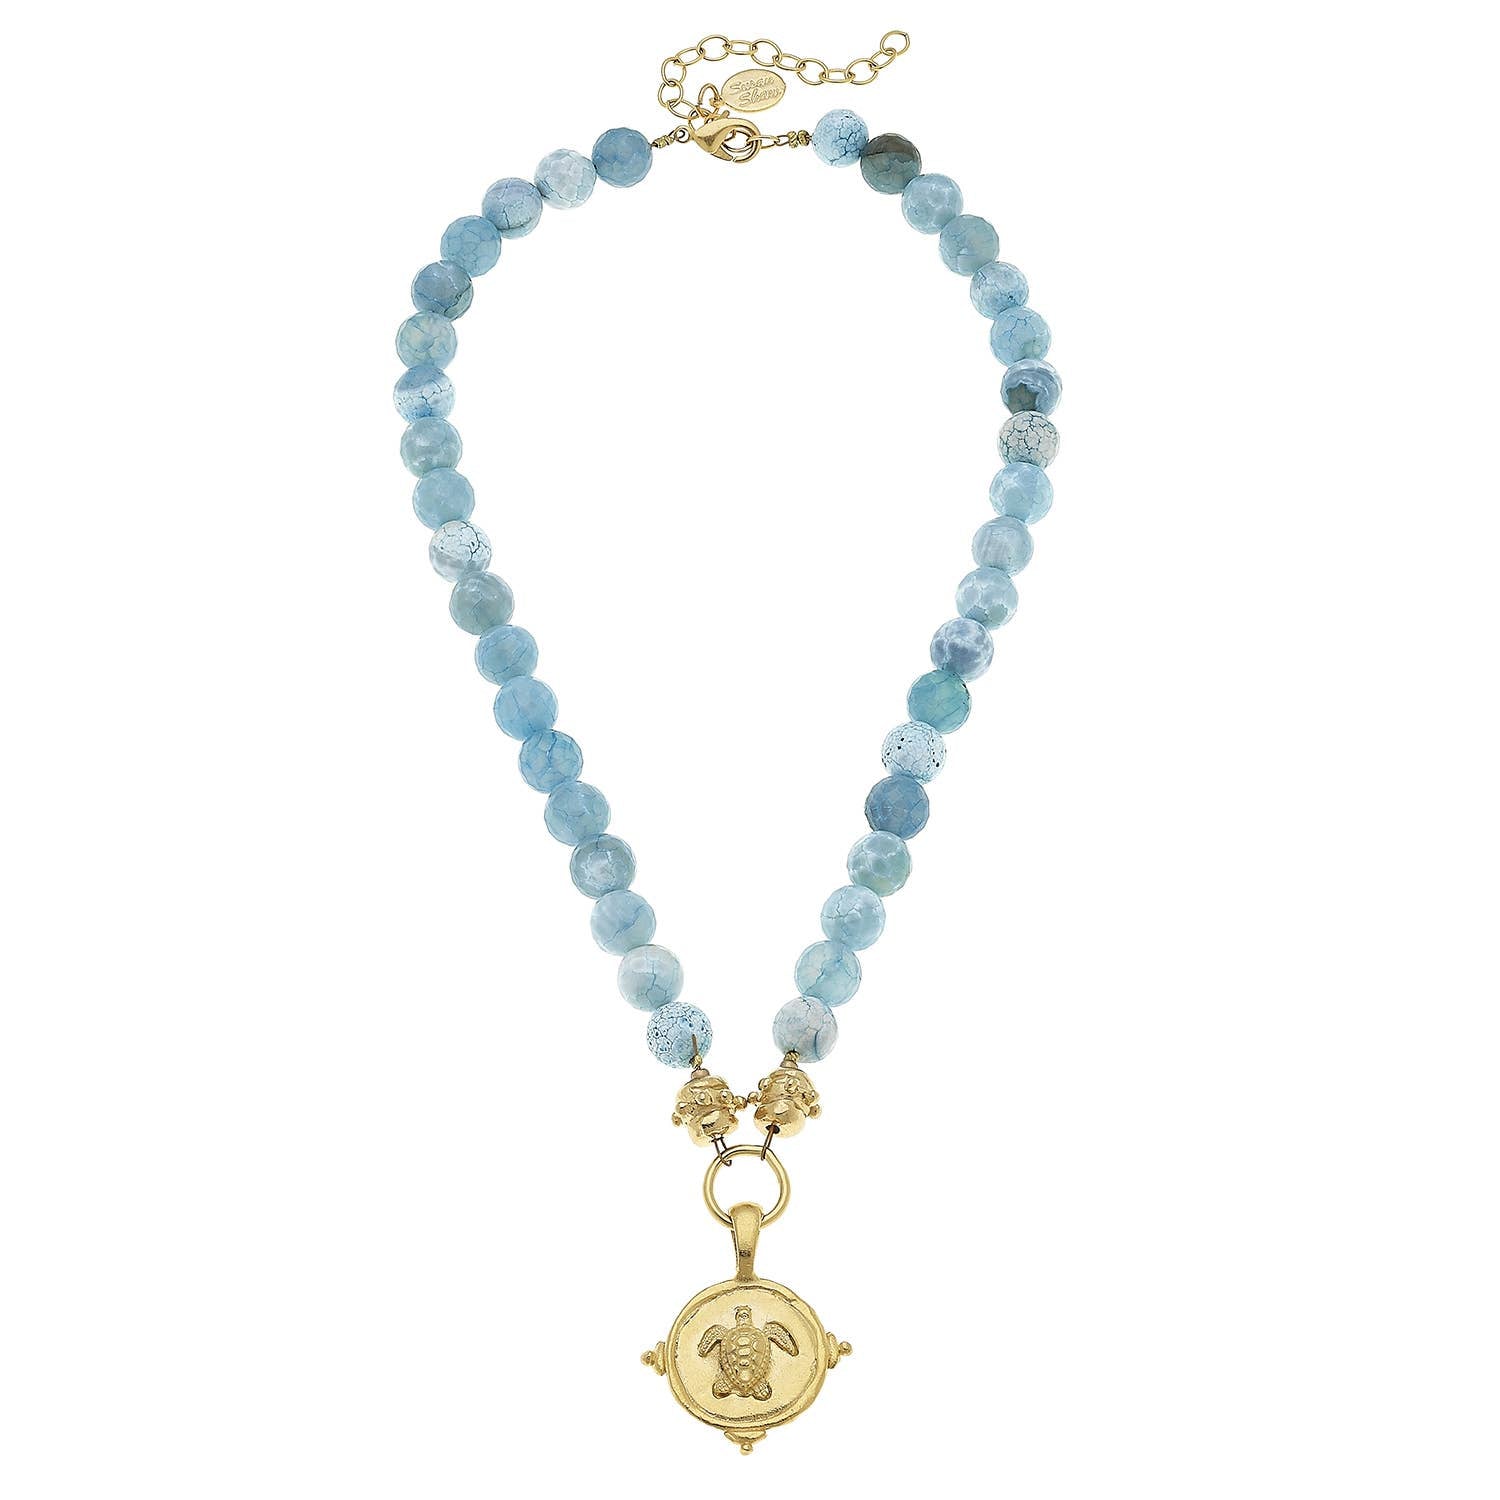 Susan Shaw - Gold Turtle on Aqua Fire Agate Necklace